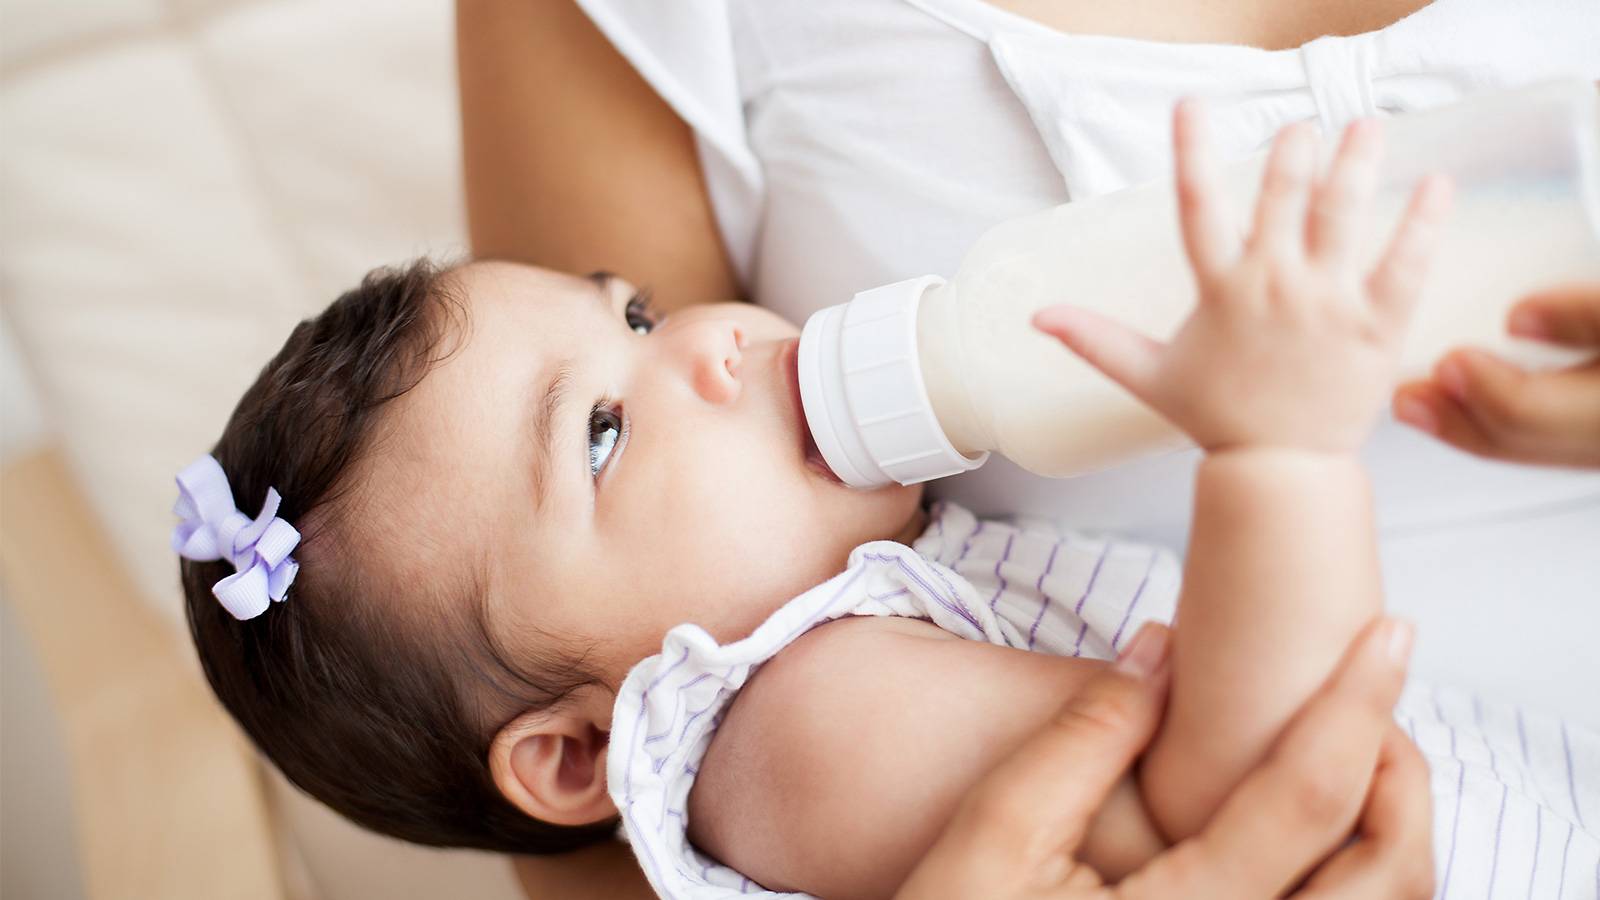 Babies-Do's-and-dont's-of-bottlefeeding-your-baby-safely-[Infographic]-MAIN